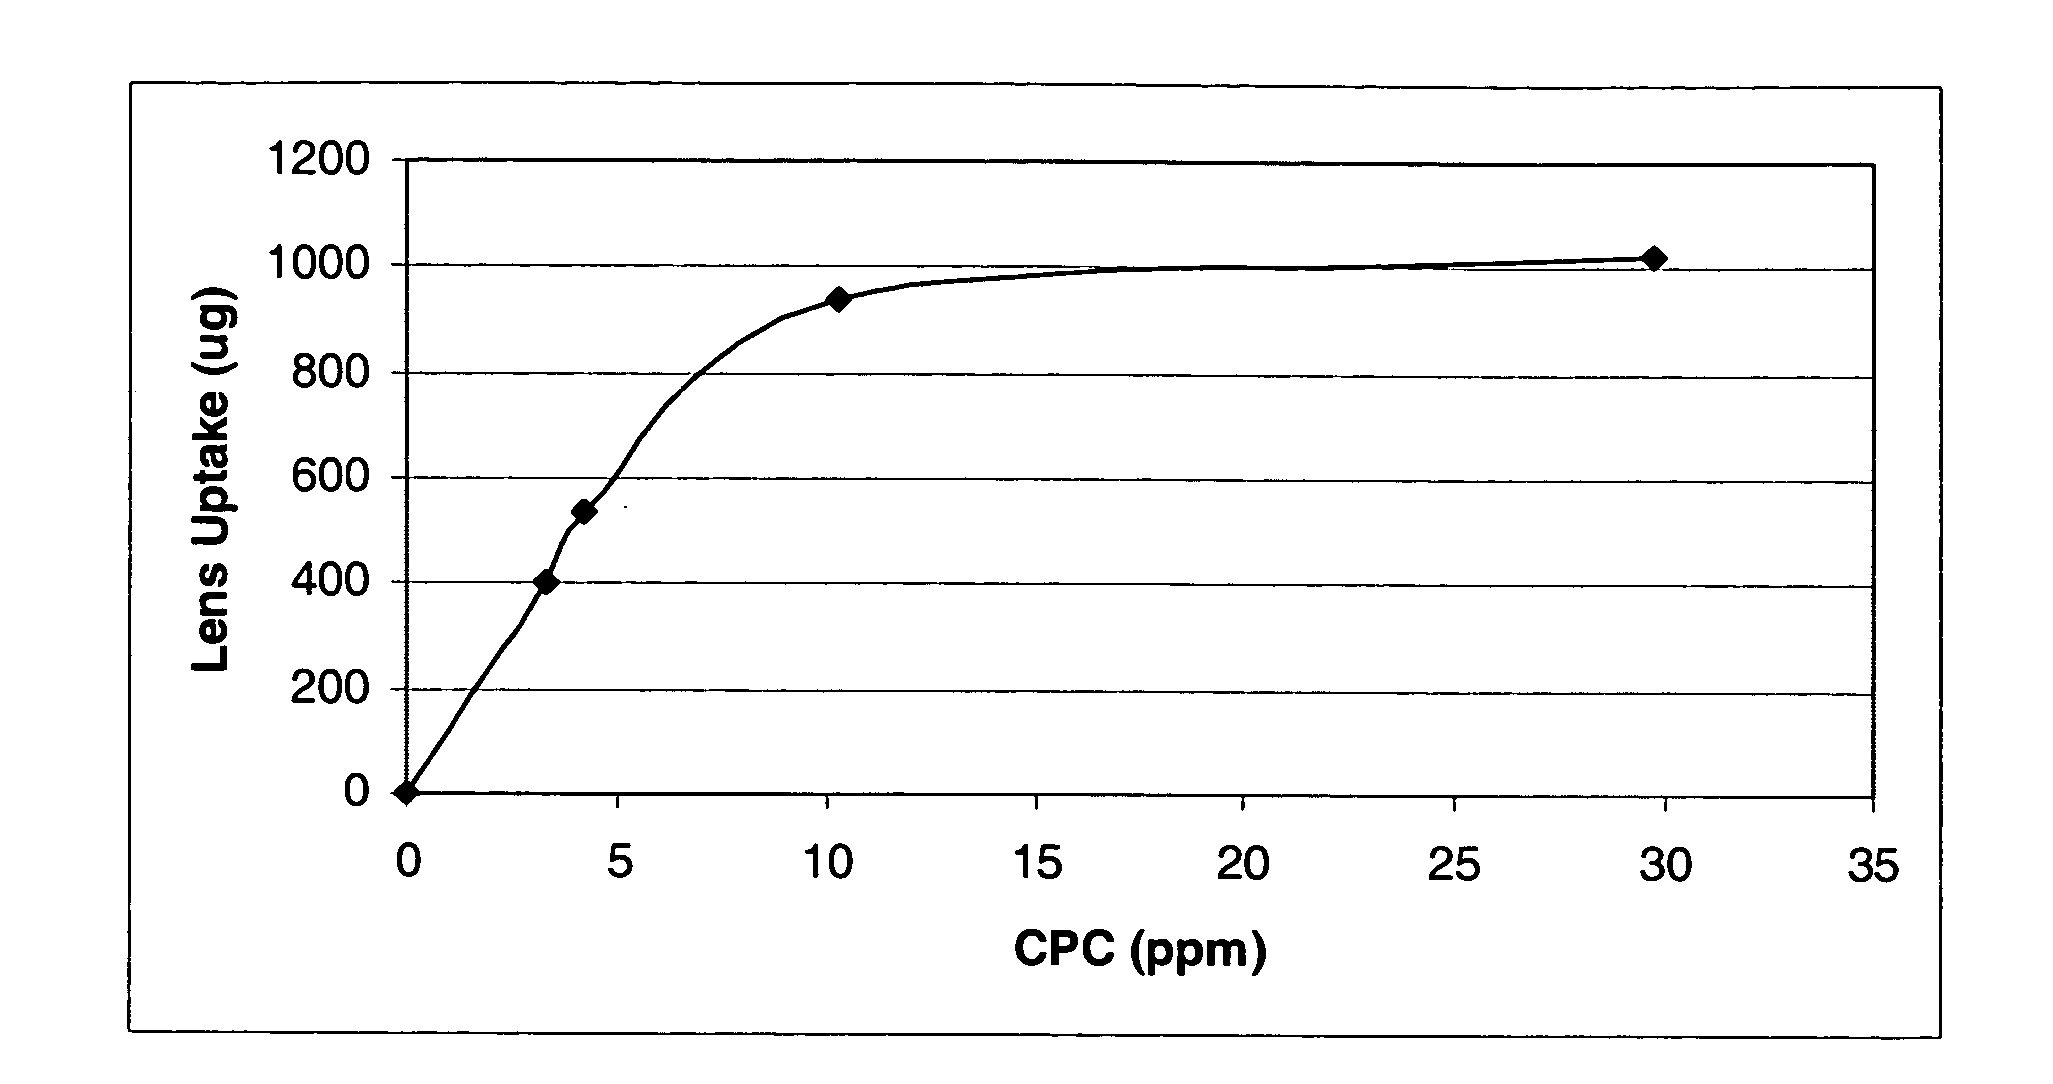 Cetylpyridinium chloride as an antimicrobial agent in ophthalmic compositions